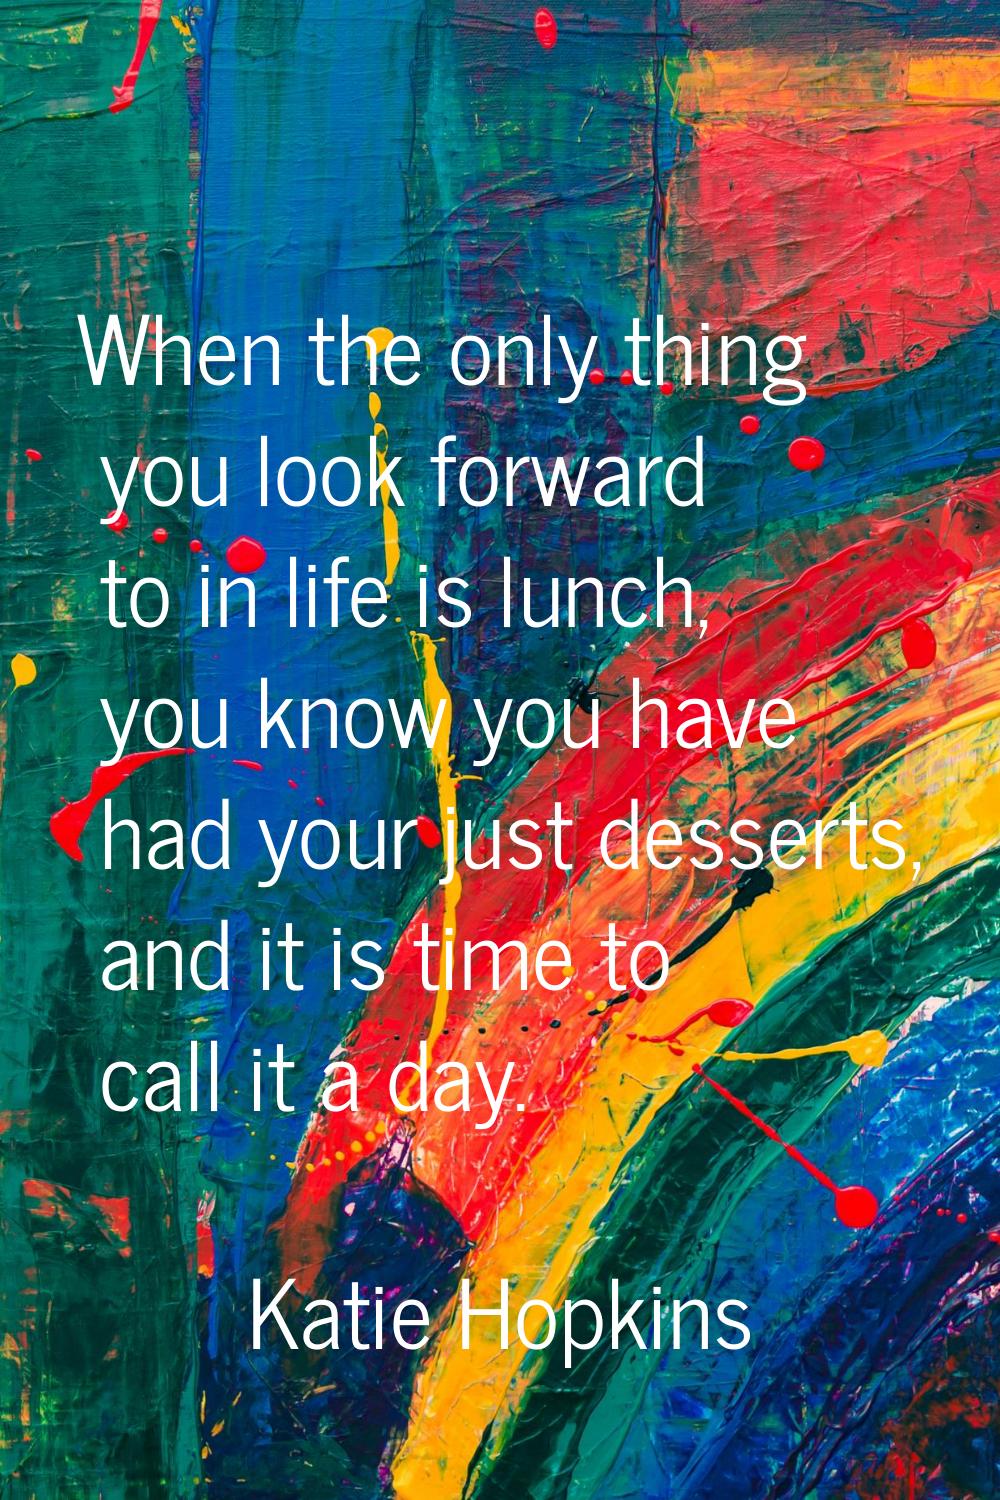 When the only thing you look forward to in life is lunch, you know you have had your just desserts,